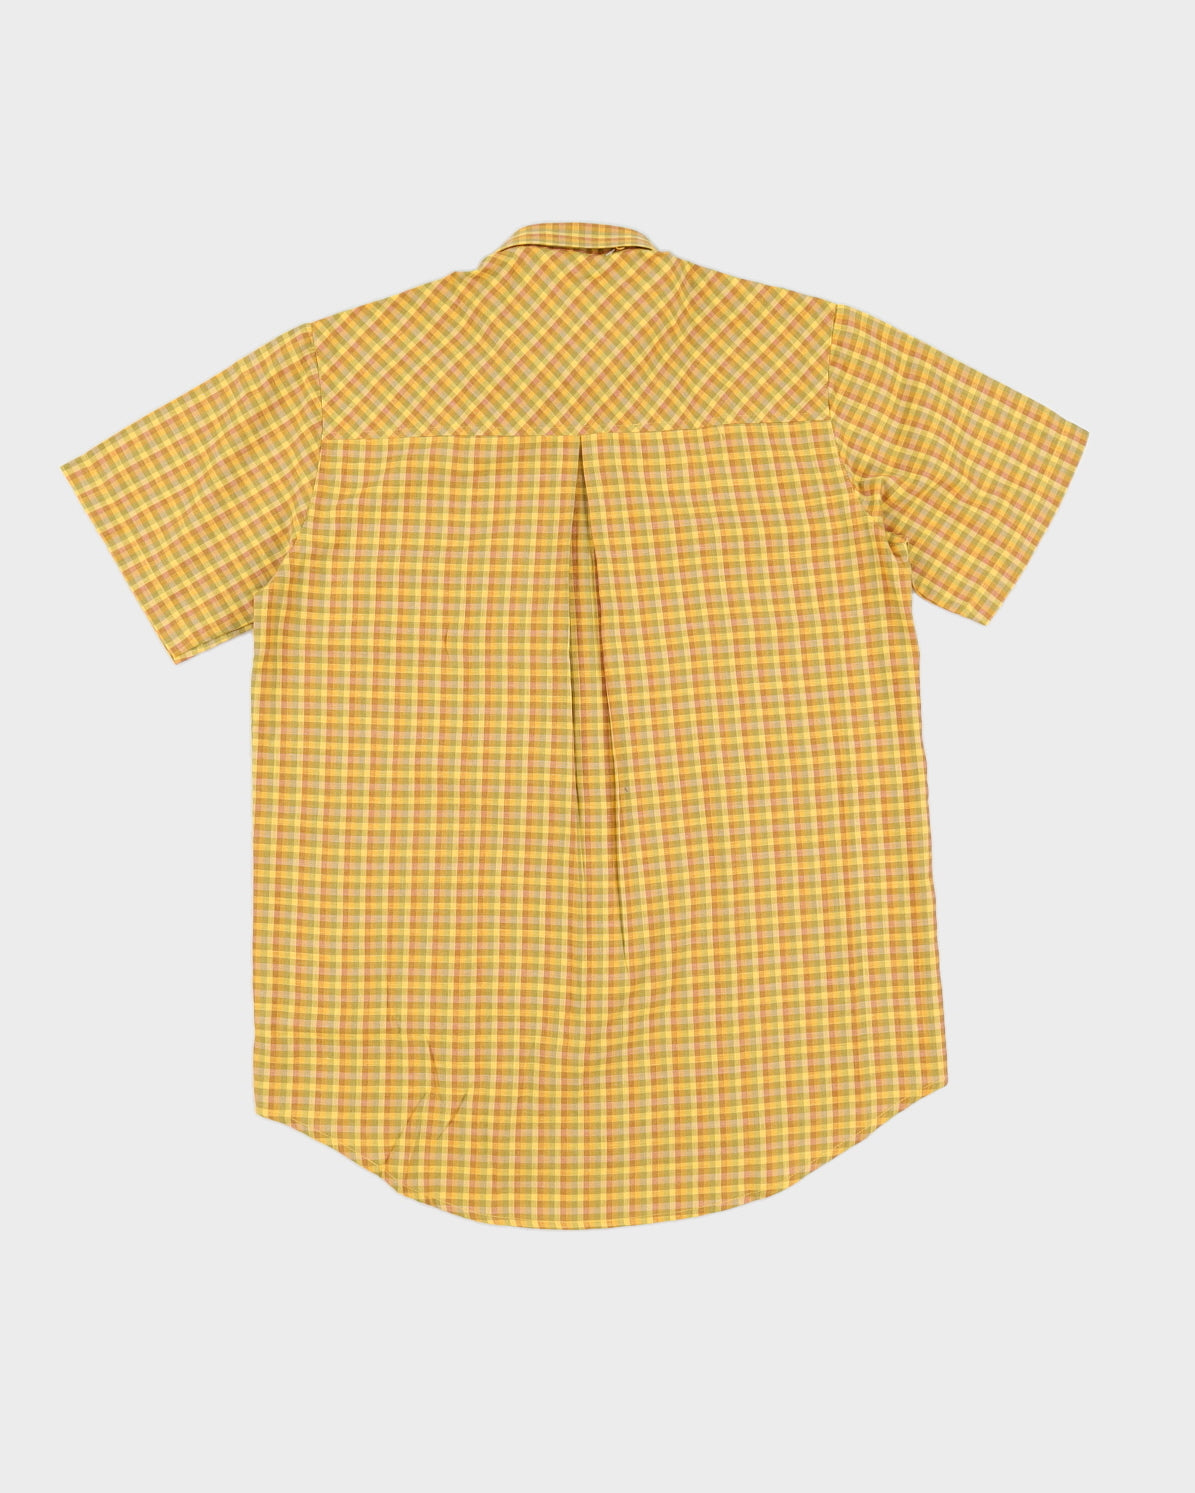 Vintage 70s Benetton Yellow Checked Short Sleeved Shirt Deadstock With Tags - M